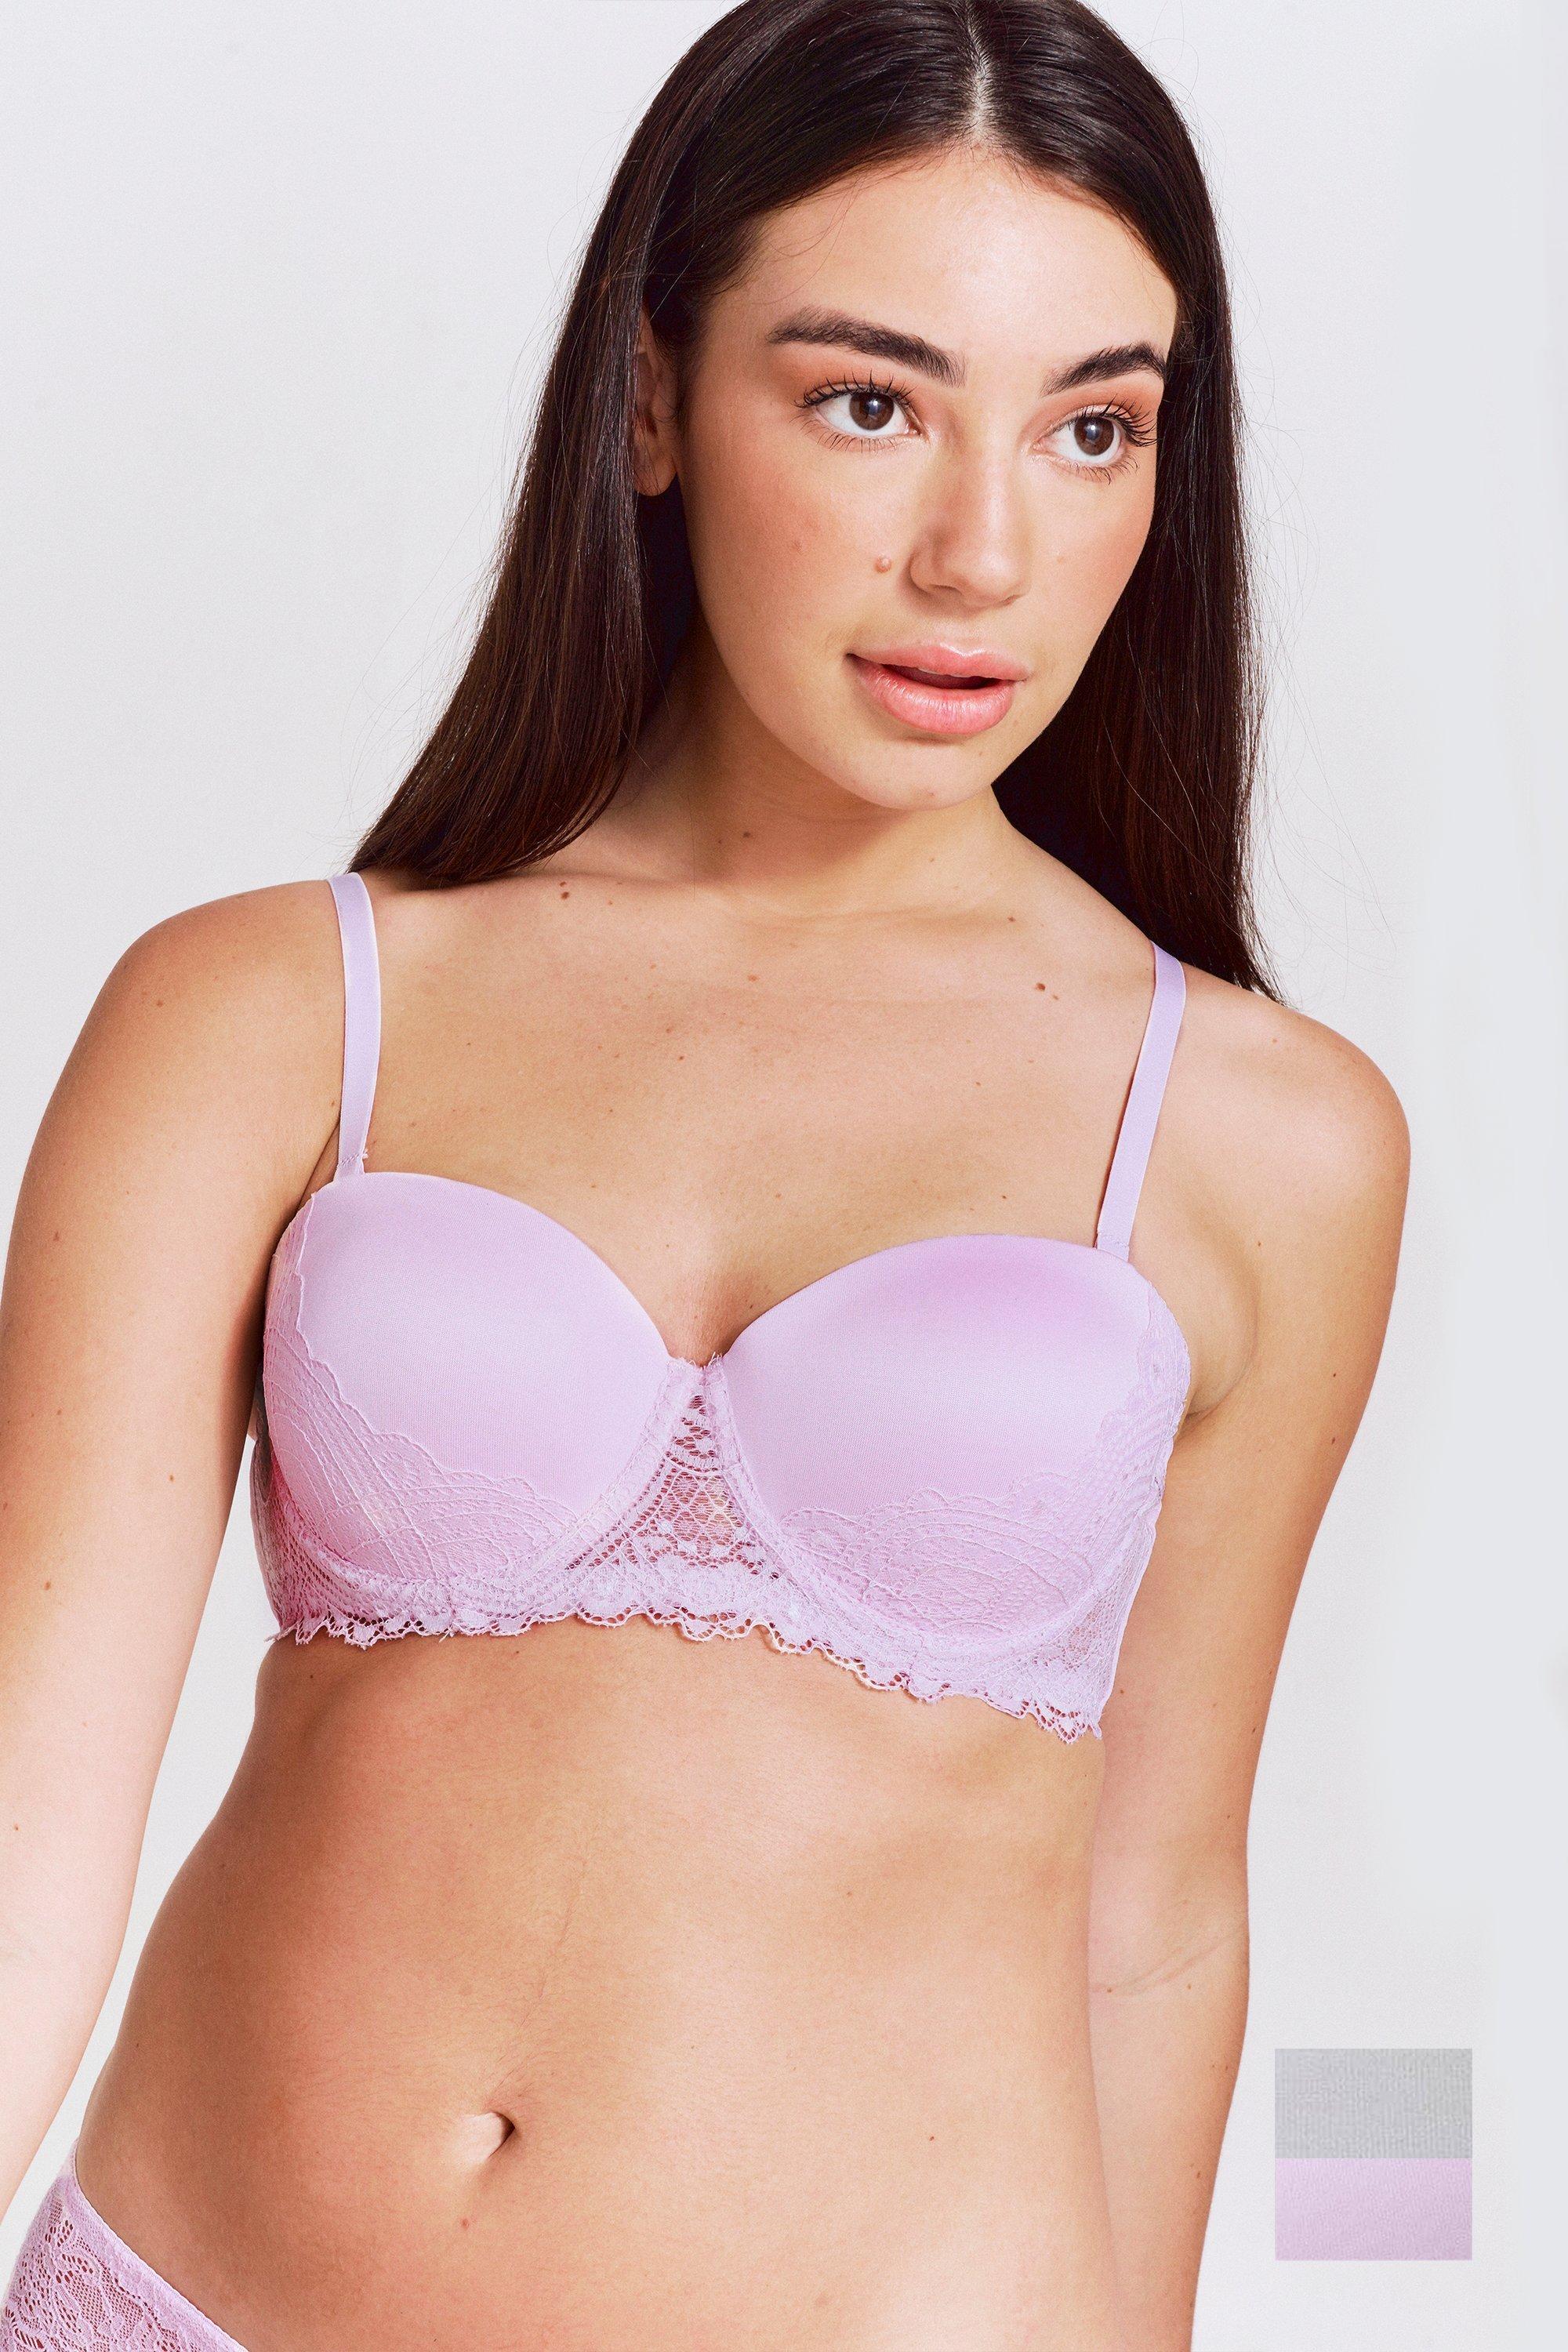 Mr Price - Matching underwear sets are where it's at 😁 Shop these and more  online, on the app and in-store. 🔍2-pack balconette bra: 1710410249 -  R139.99 (Available in sizes up to